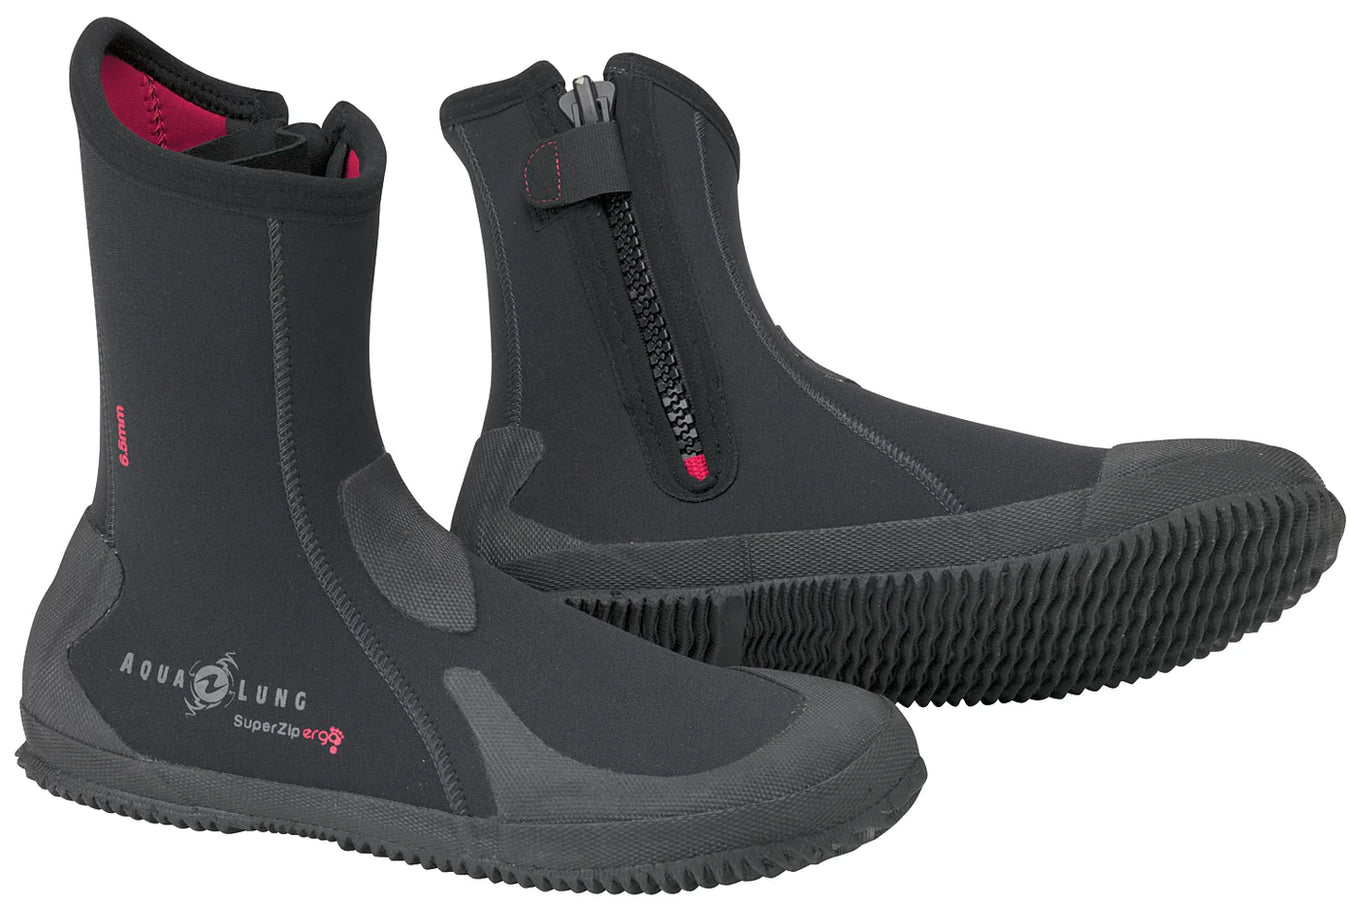 footwear for scuba diving and other water sports